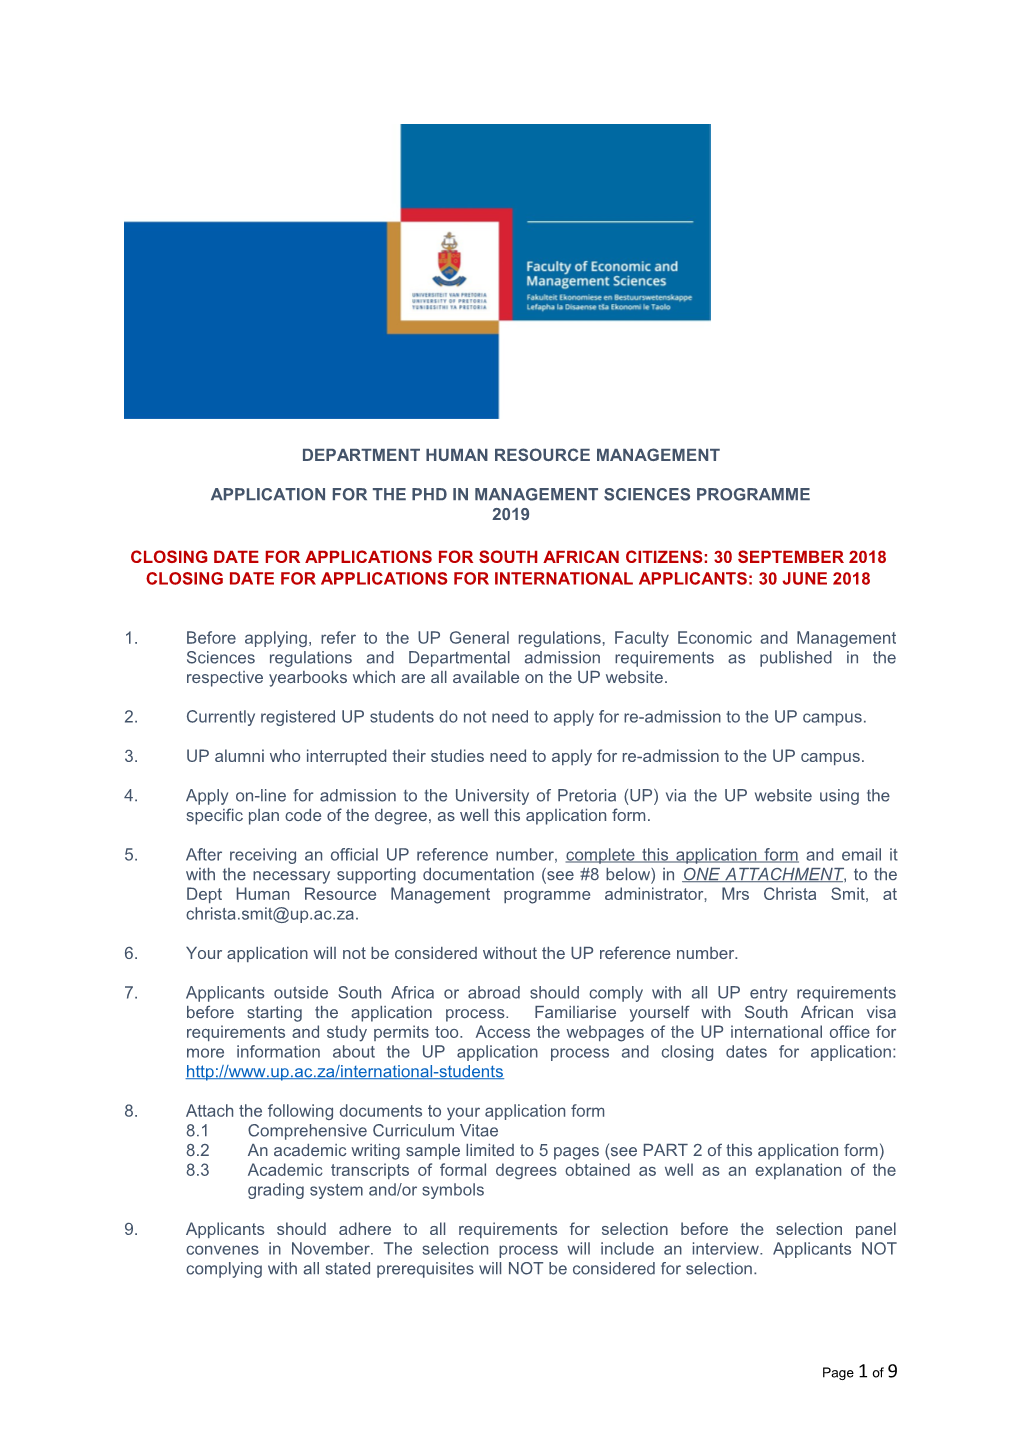 Application for the Phd in Management Sciences Programme